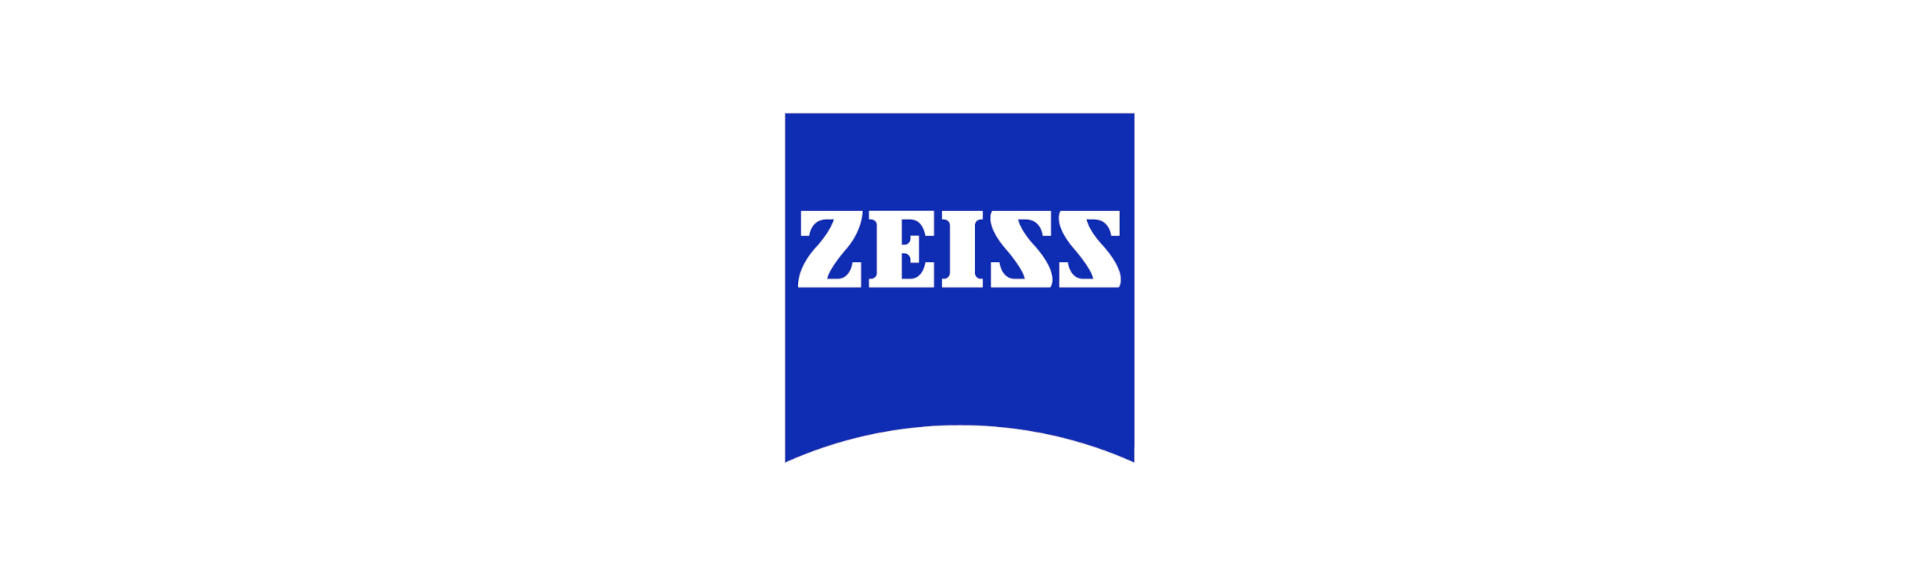 Carl Zeiss Meditec AG Completes Acquisition of Dutch Ophthalmic Research Center (D.O.R.C.); Companies Unite to Shape Ophthalmology Market